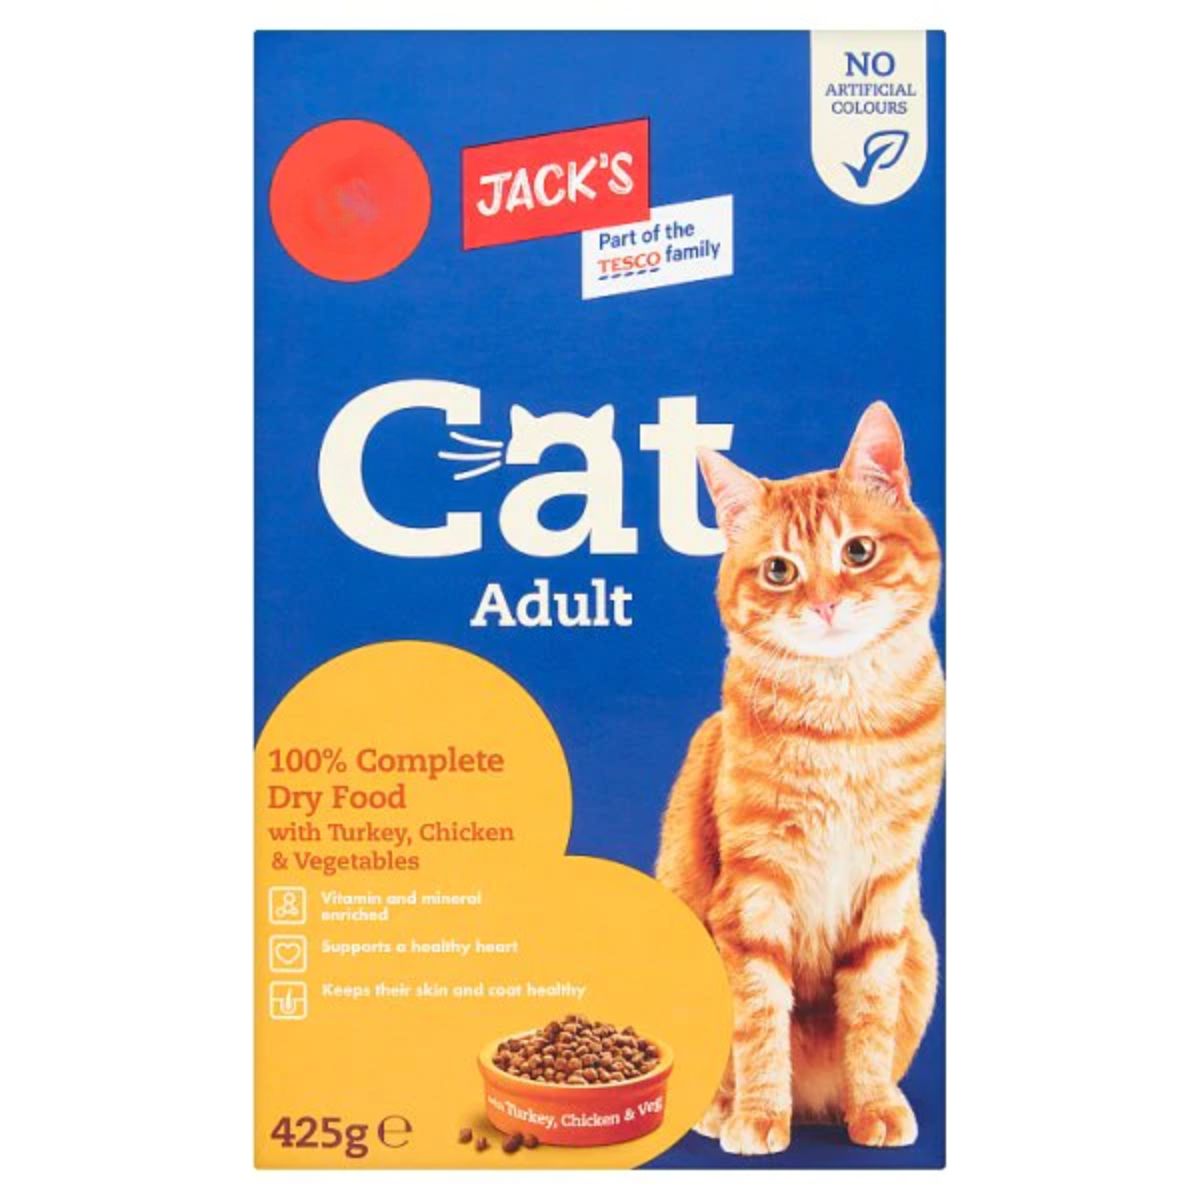 Jacks - Cat Adult with Turkey, Chicken & Vegetables - 425g dry food.